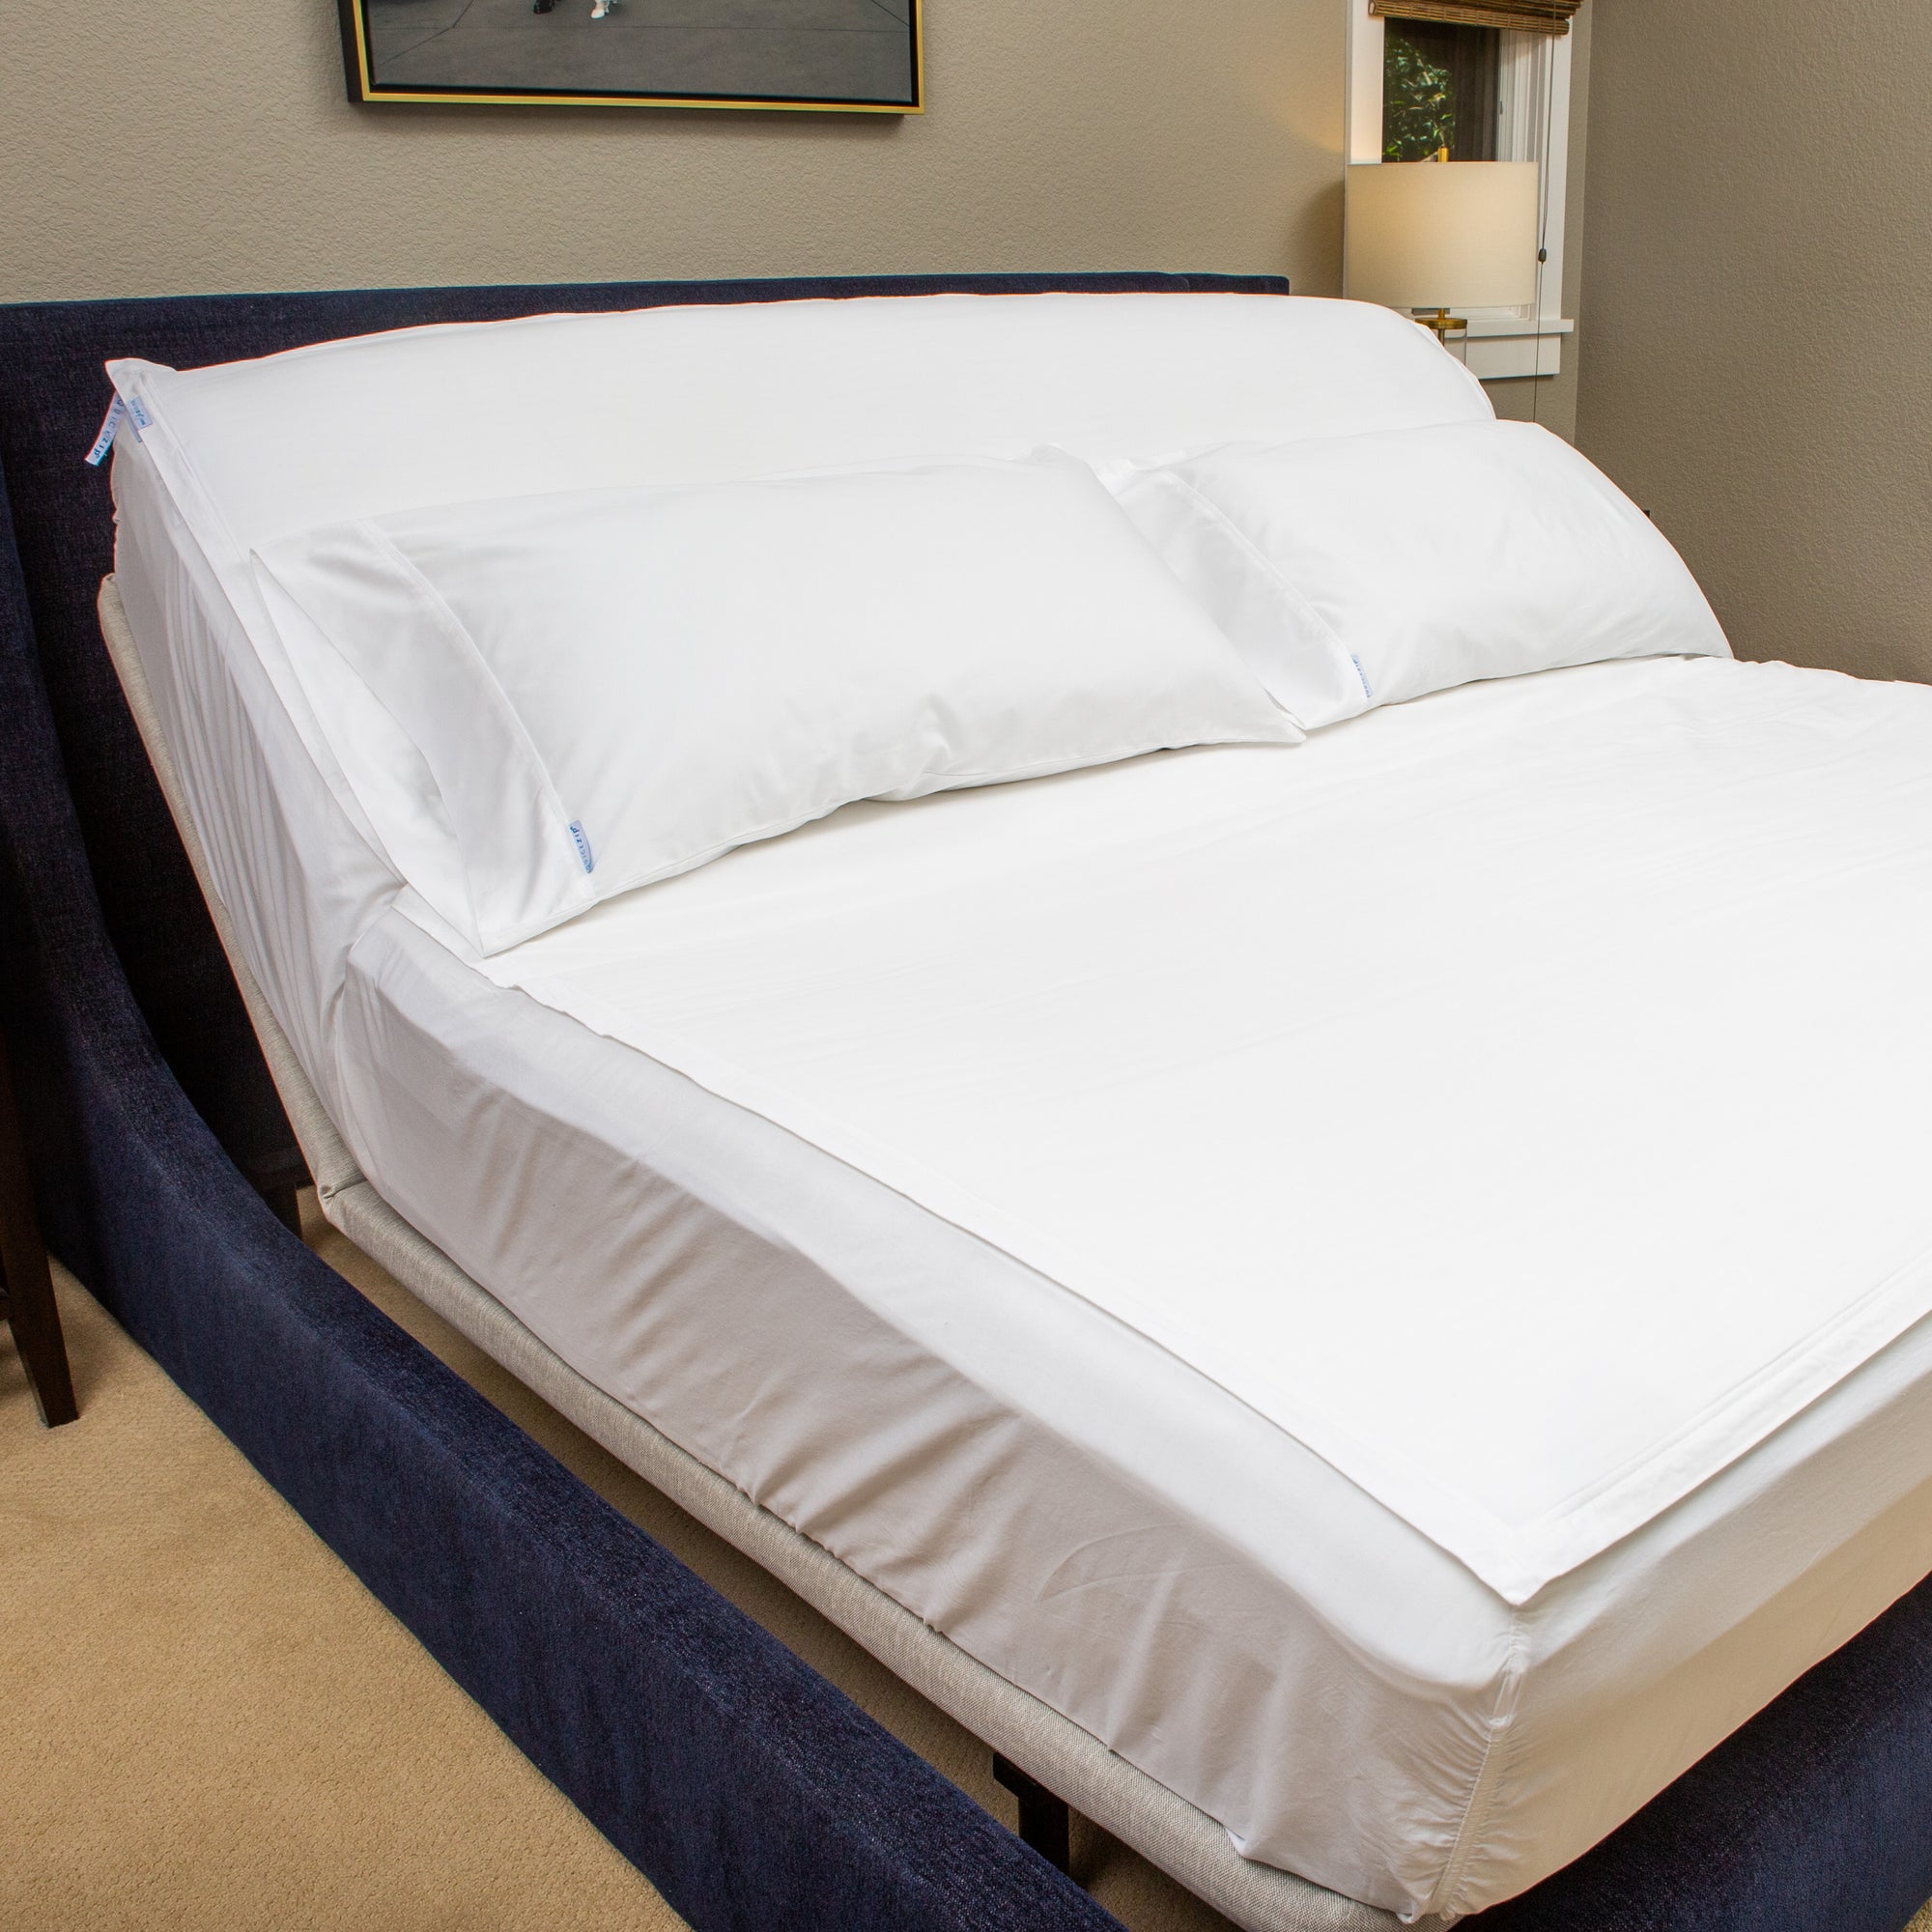 QuickZip Fitted Sheets for Adjustable Beds